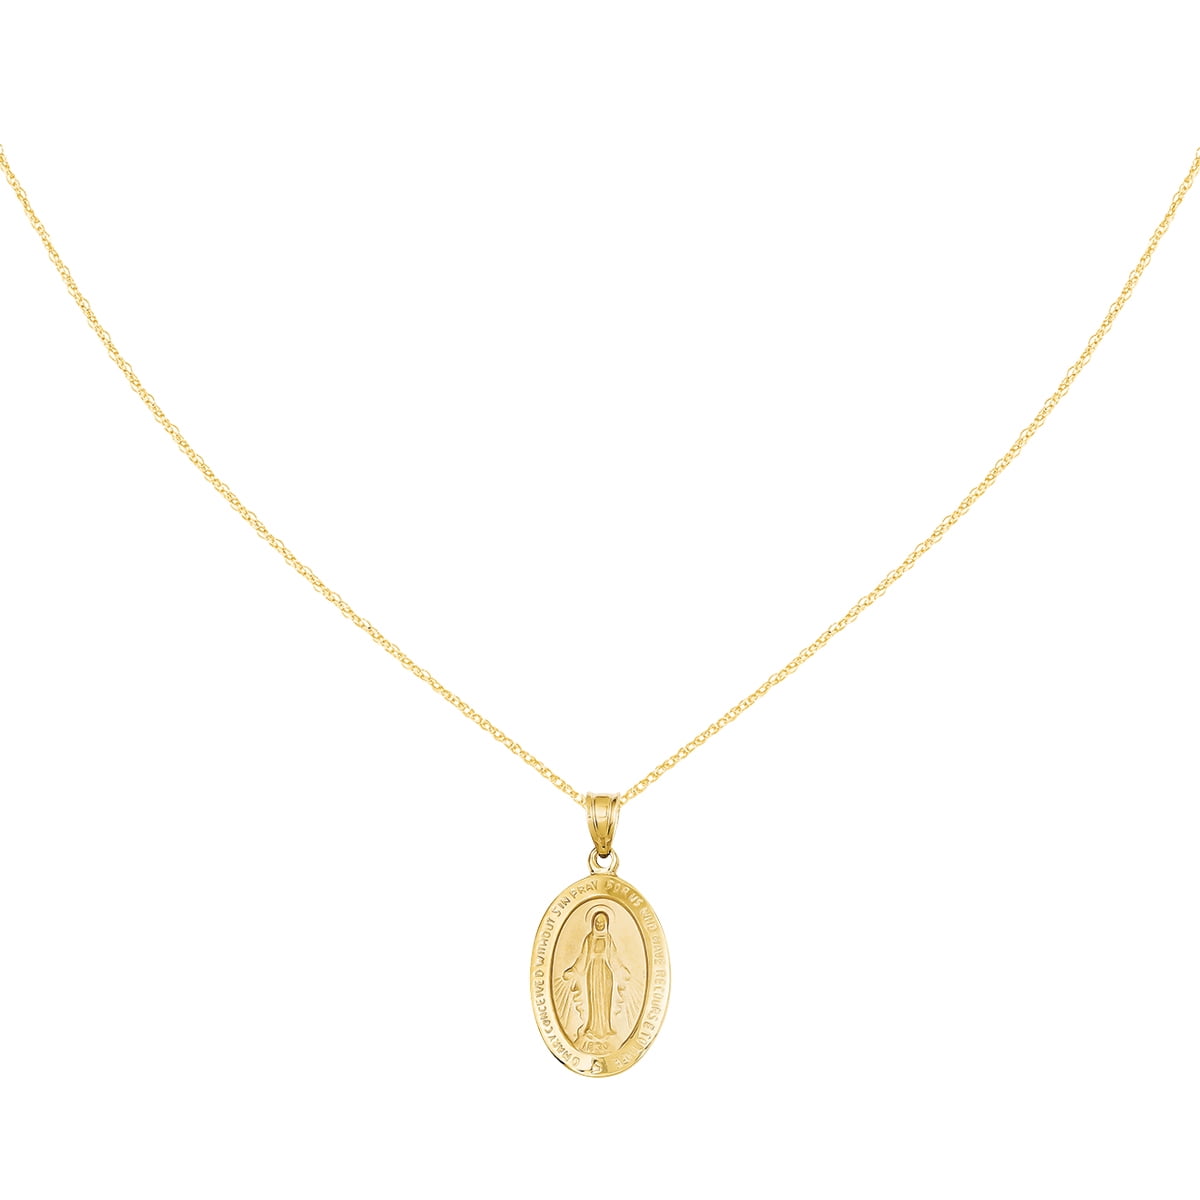 Guess 14k Solid Yellow Gold Pendant 17 x 17mm